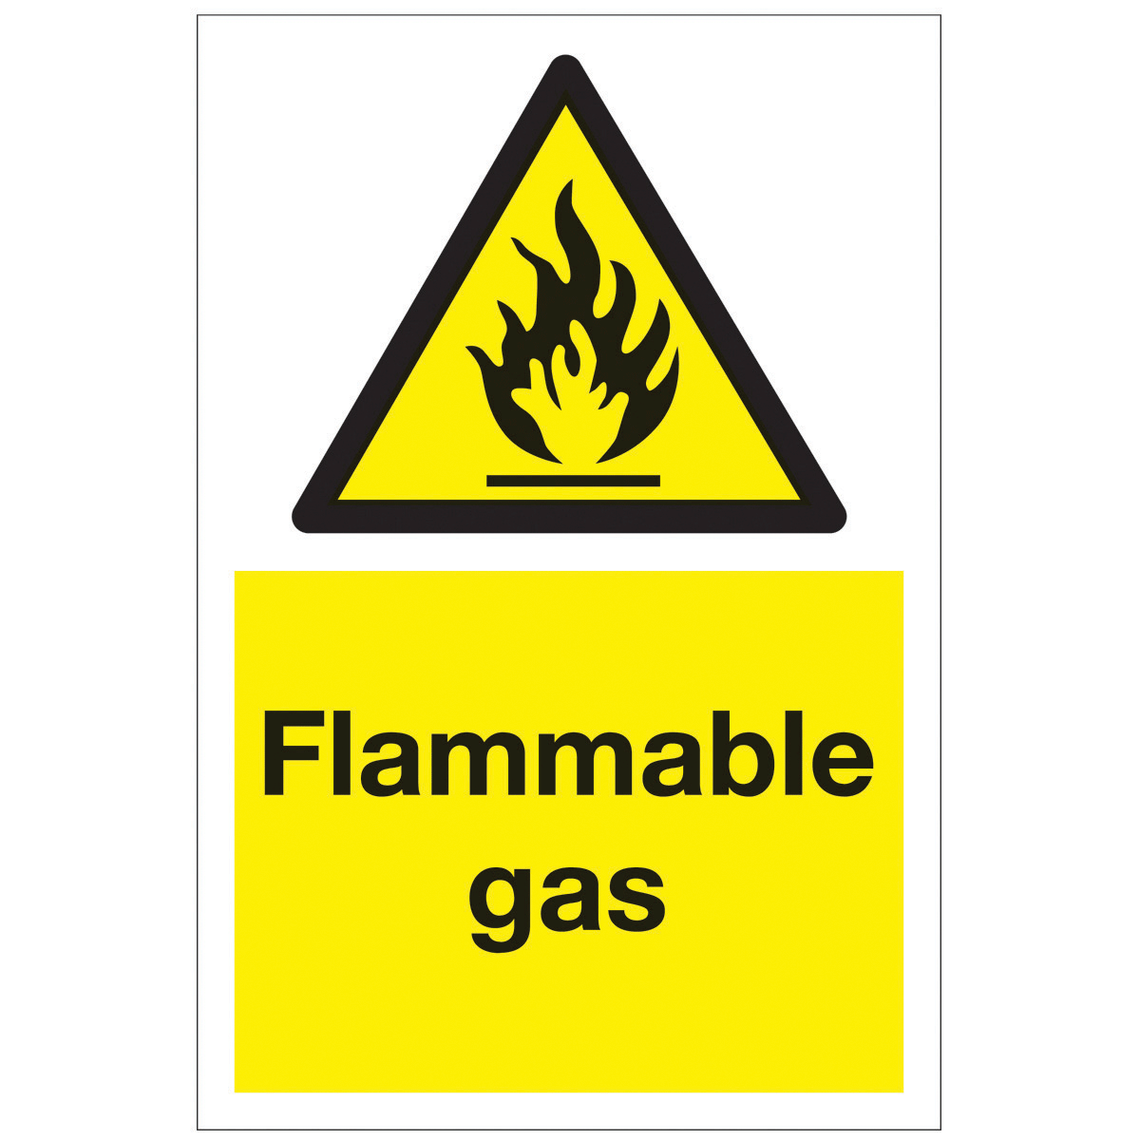 Safety Symbols For Flammable ClipArt Best Clipart - Free to use ...